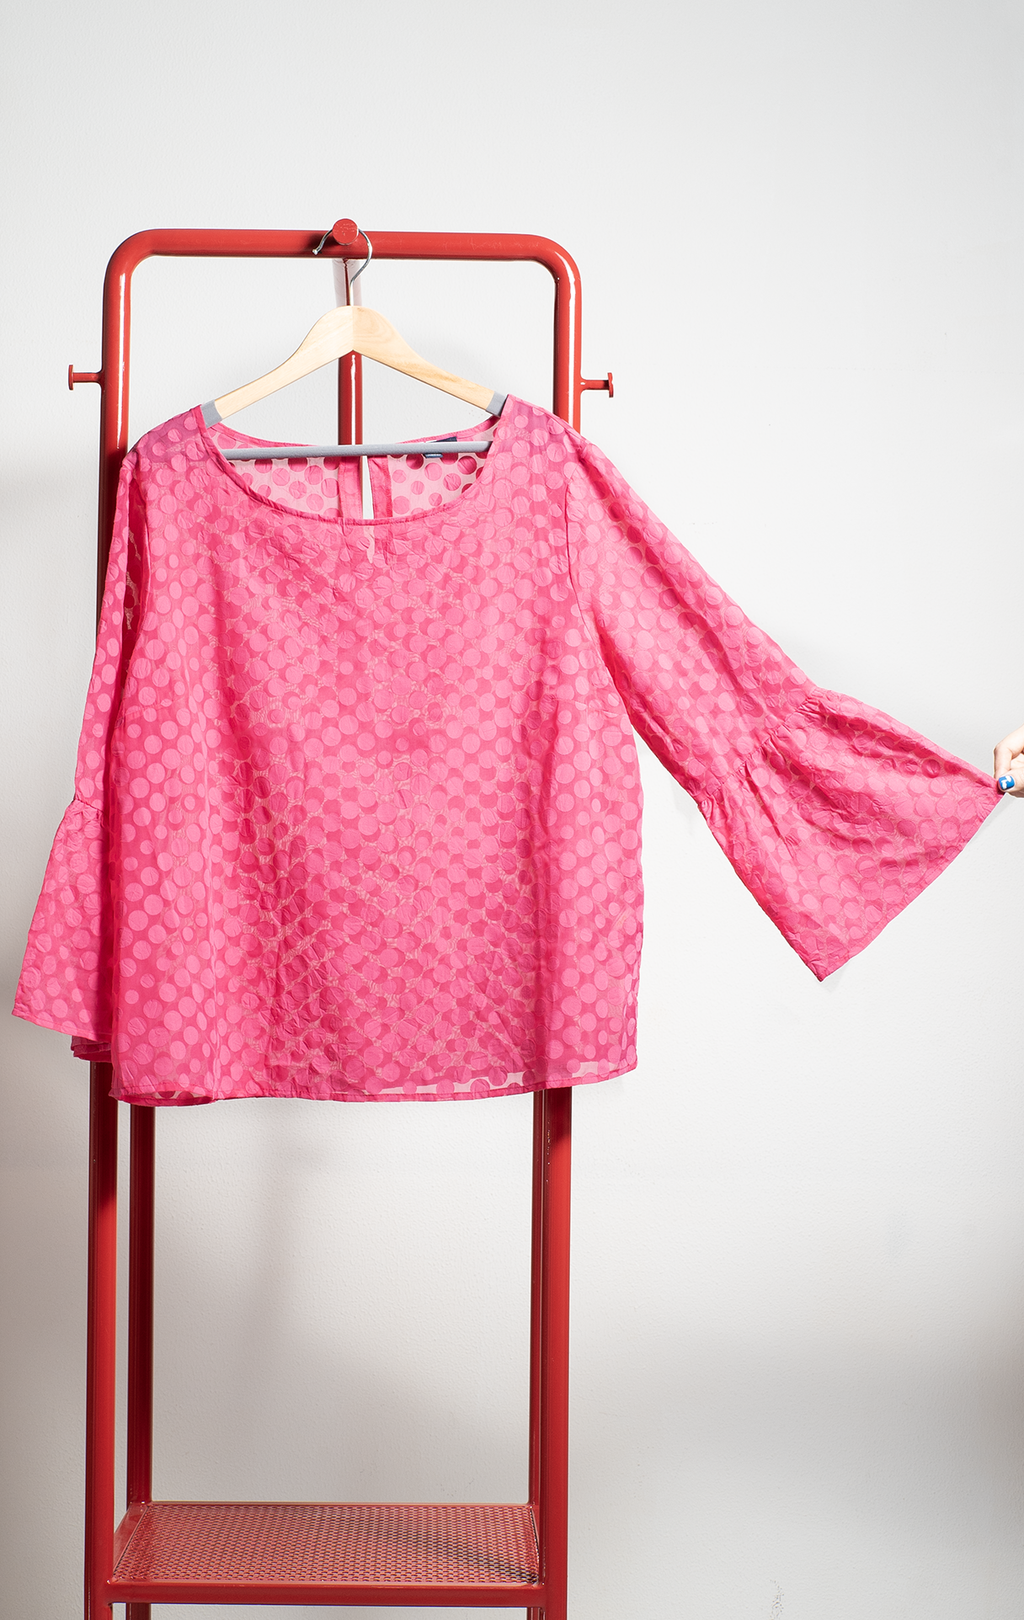 TOMMY HILFIGER TOP - Fuschia dotted - XLarge